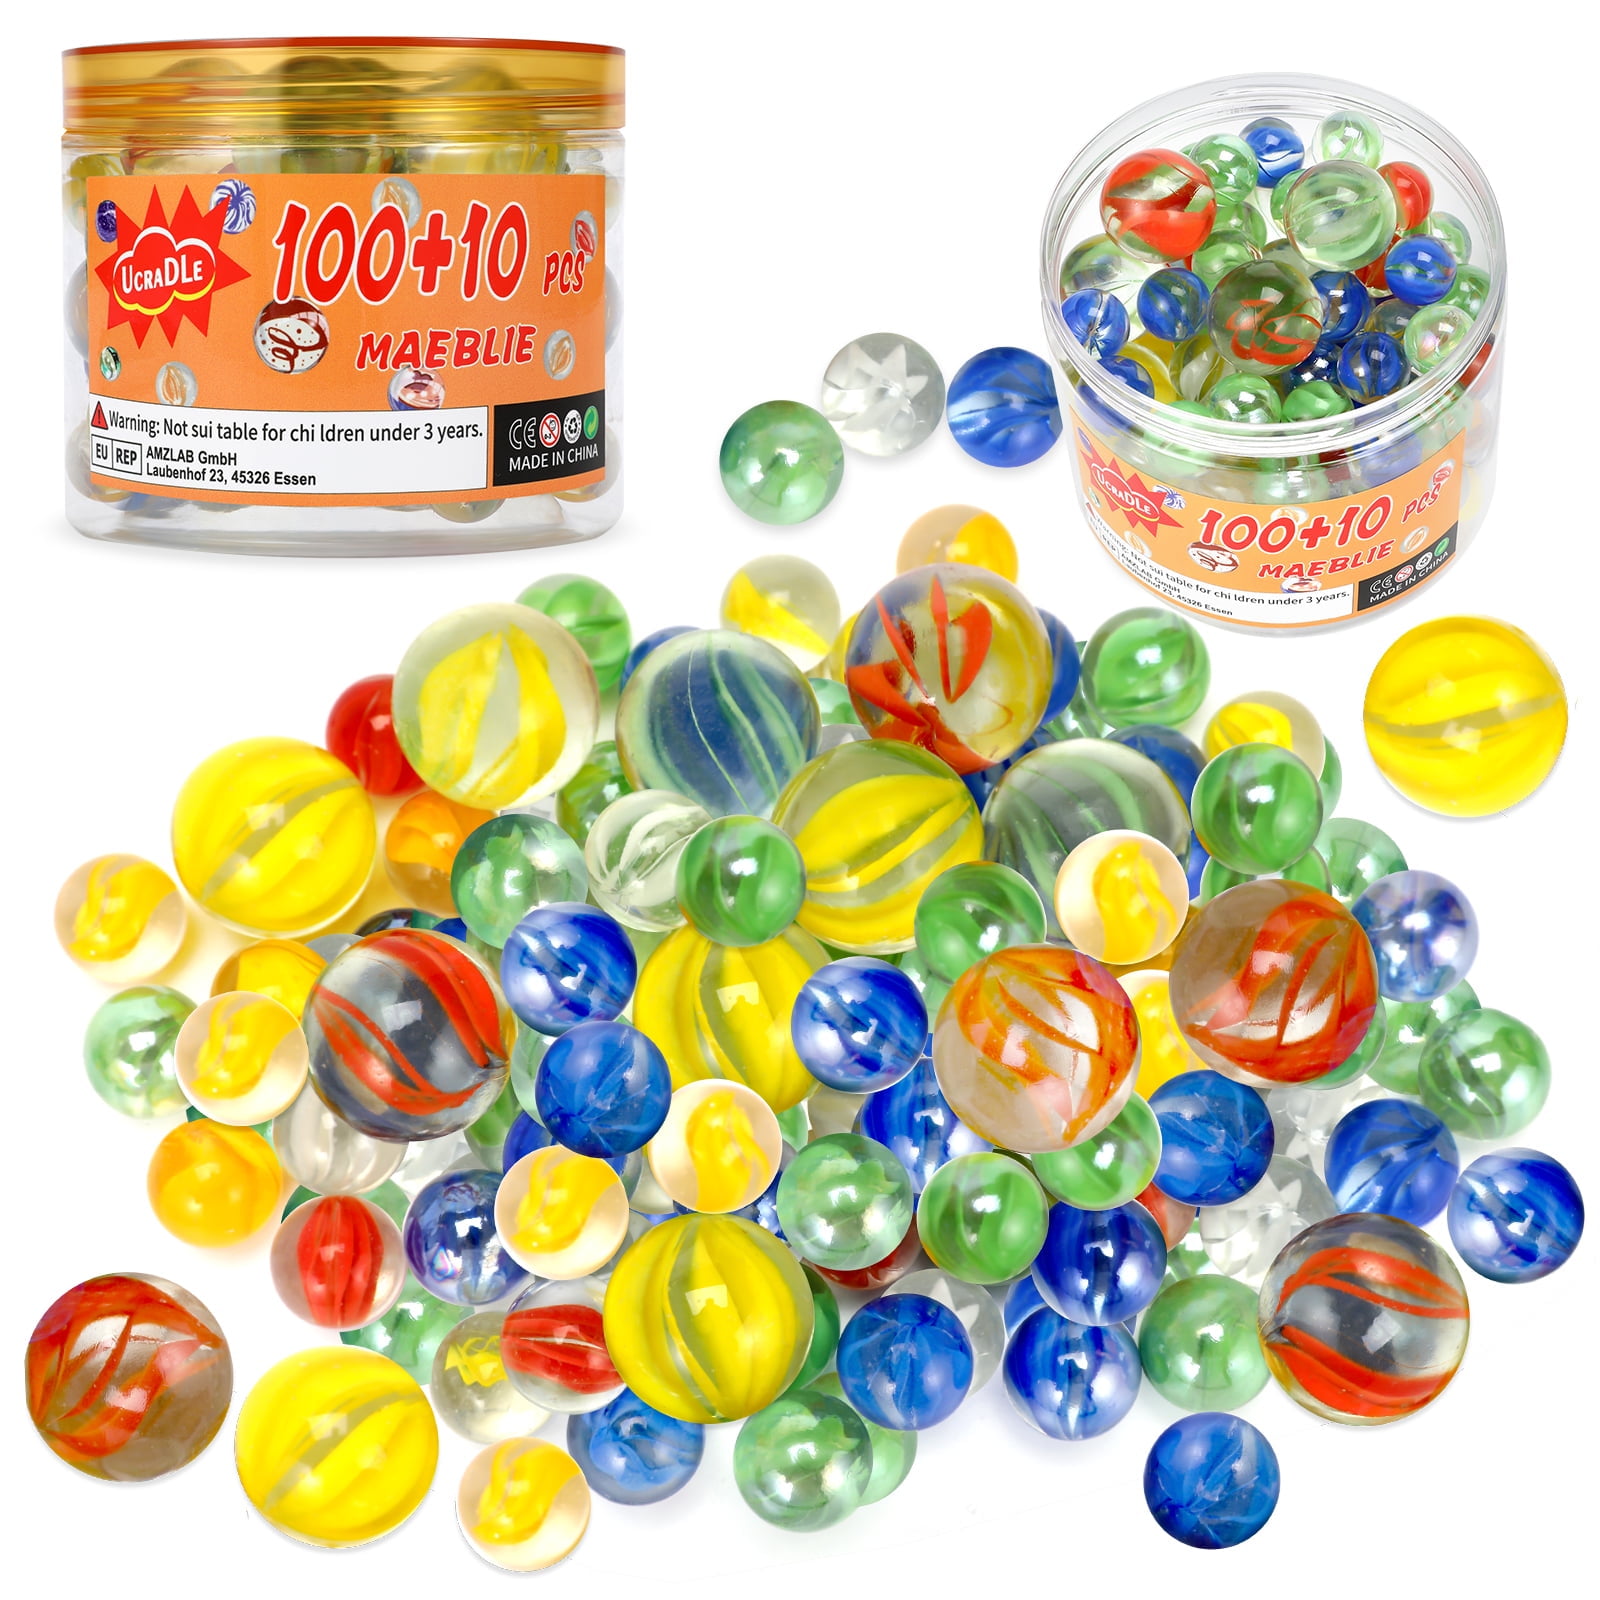 Ucradle Glass Marbles, 100 Pieces 16mm+10pieces 25mm Traditional Assorted  Colorful Classic Retro Glass Marbles Cat's Eye Marbles Game Toys Come in  Jar for Kids DIY and Home Decoration 